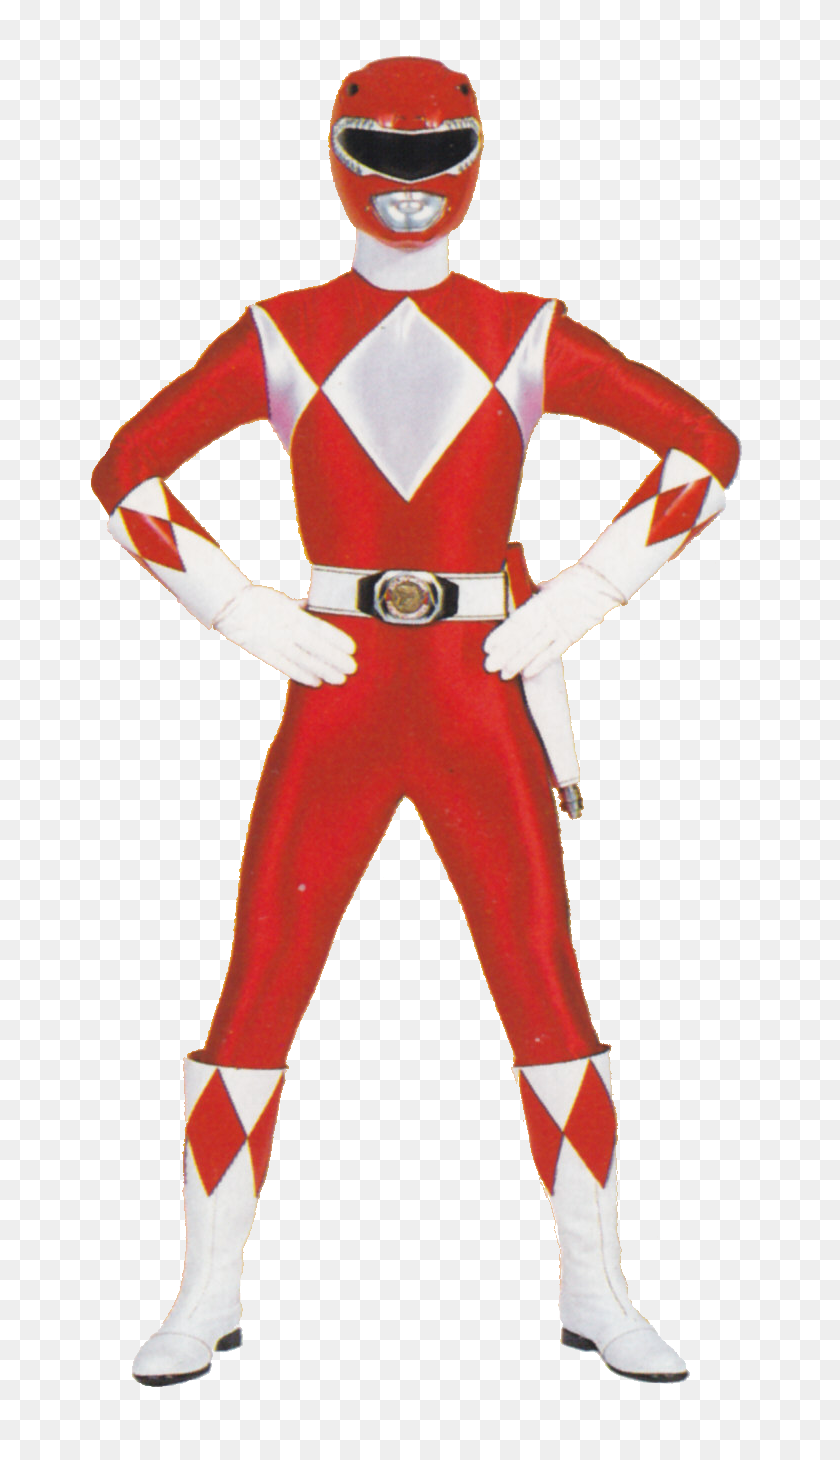 688x1400 Power Rangers Png Transparent Power Rangers Images - Lens Flare PNG Red